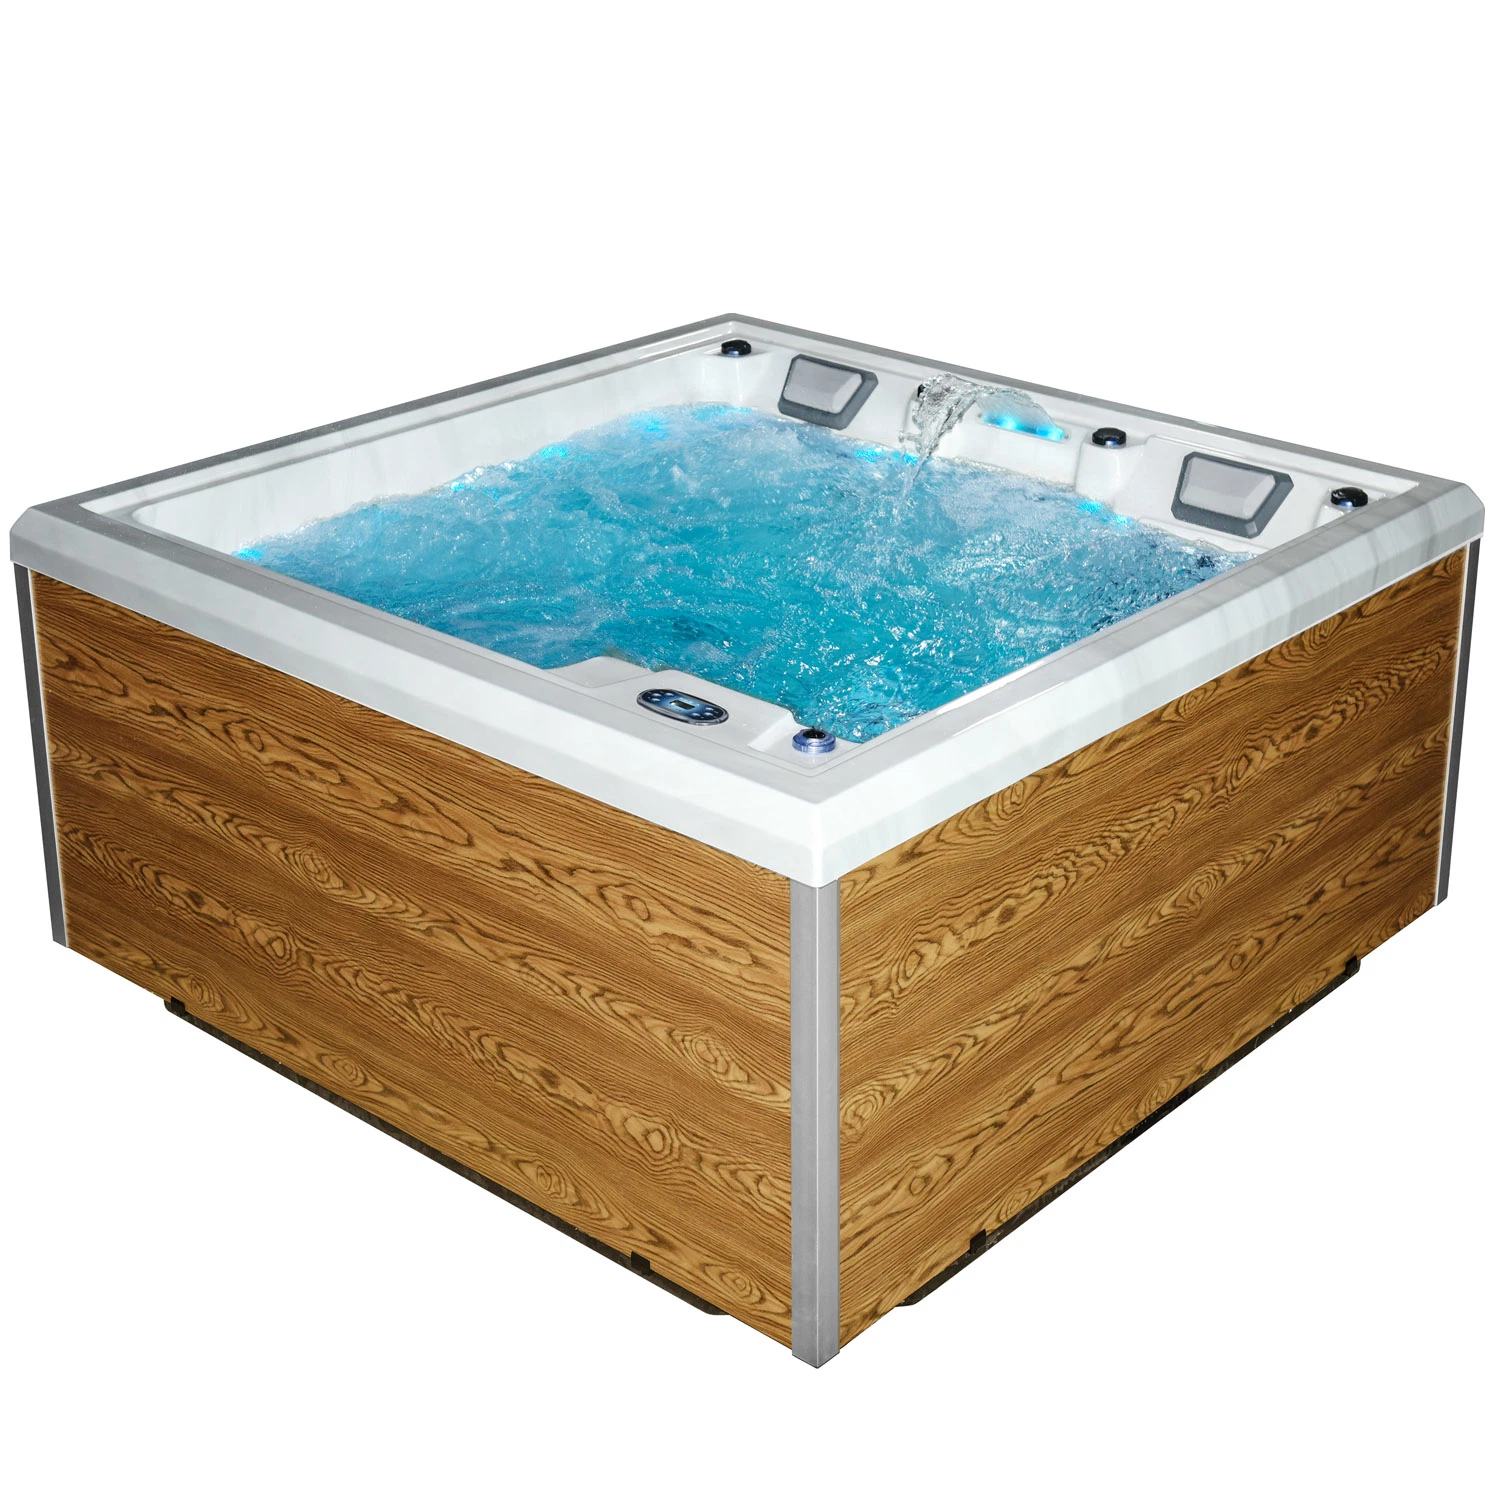 Winer Factory Free-Standing Hot Bathtub Acrylic ODM Bathtub Cheap Price Outdoor Hot Massage SPA Tub with LED Lamp for 4 Person